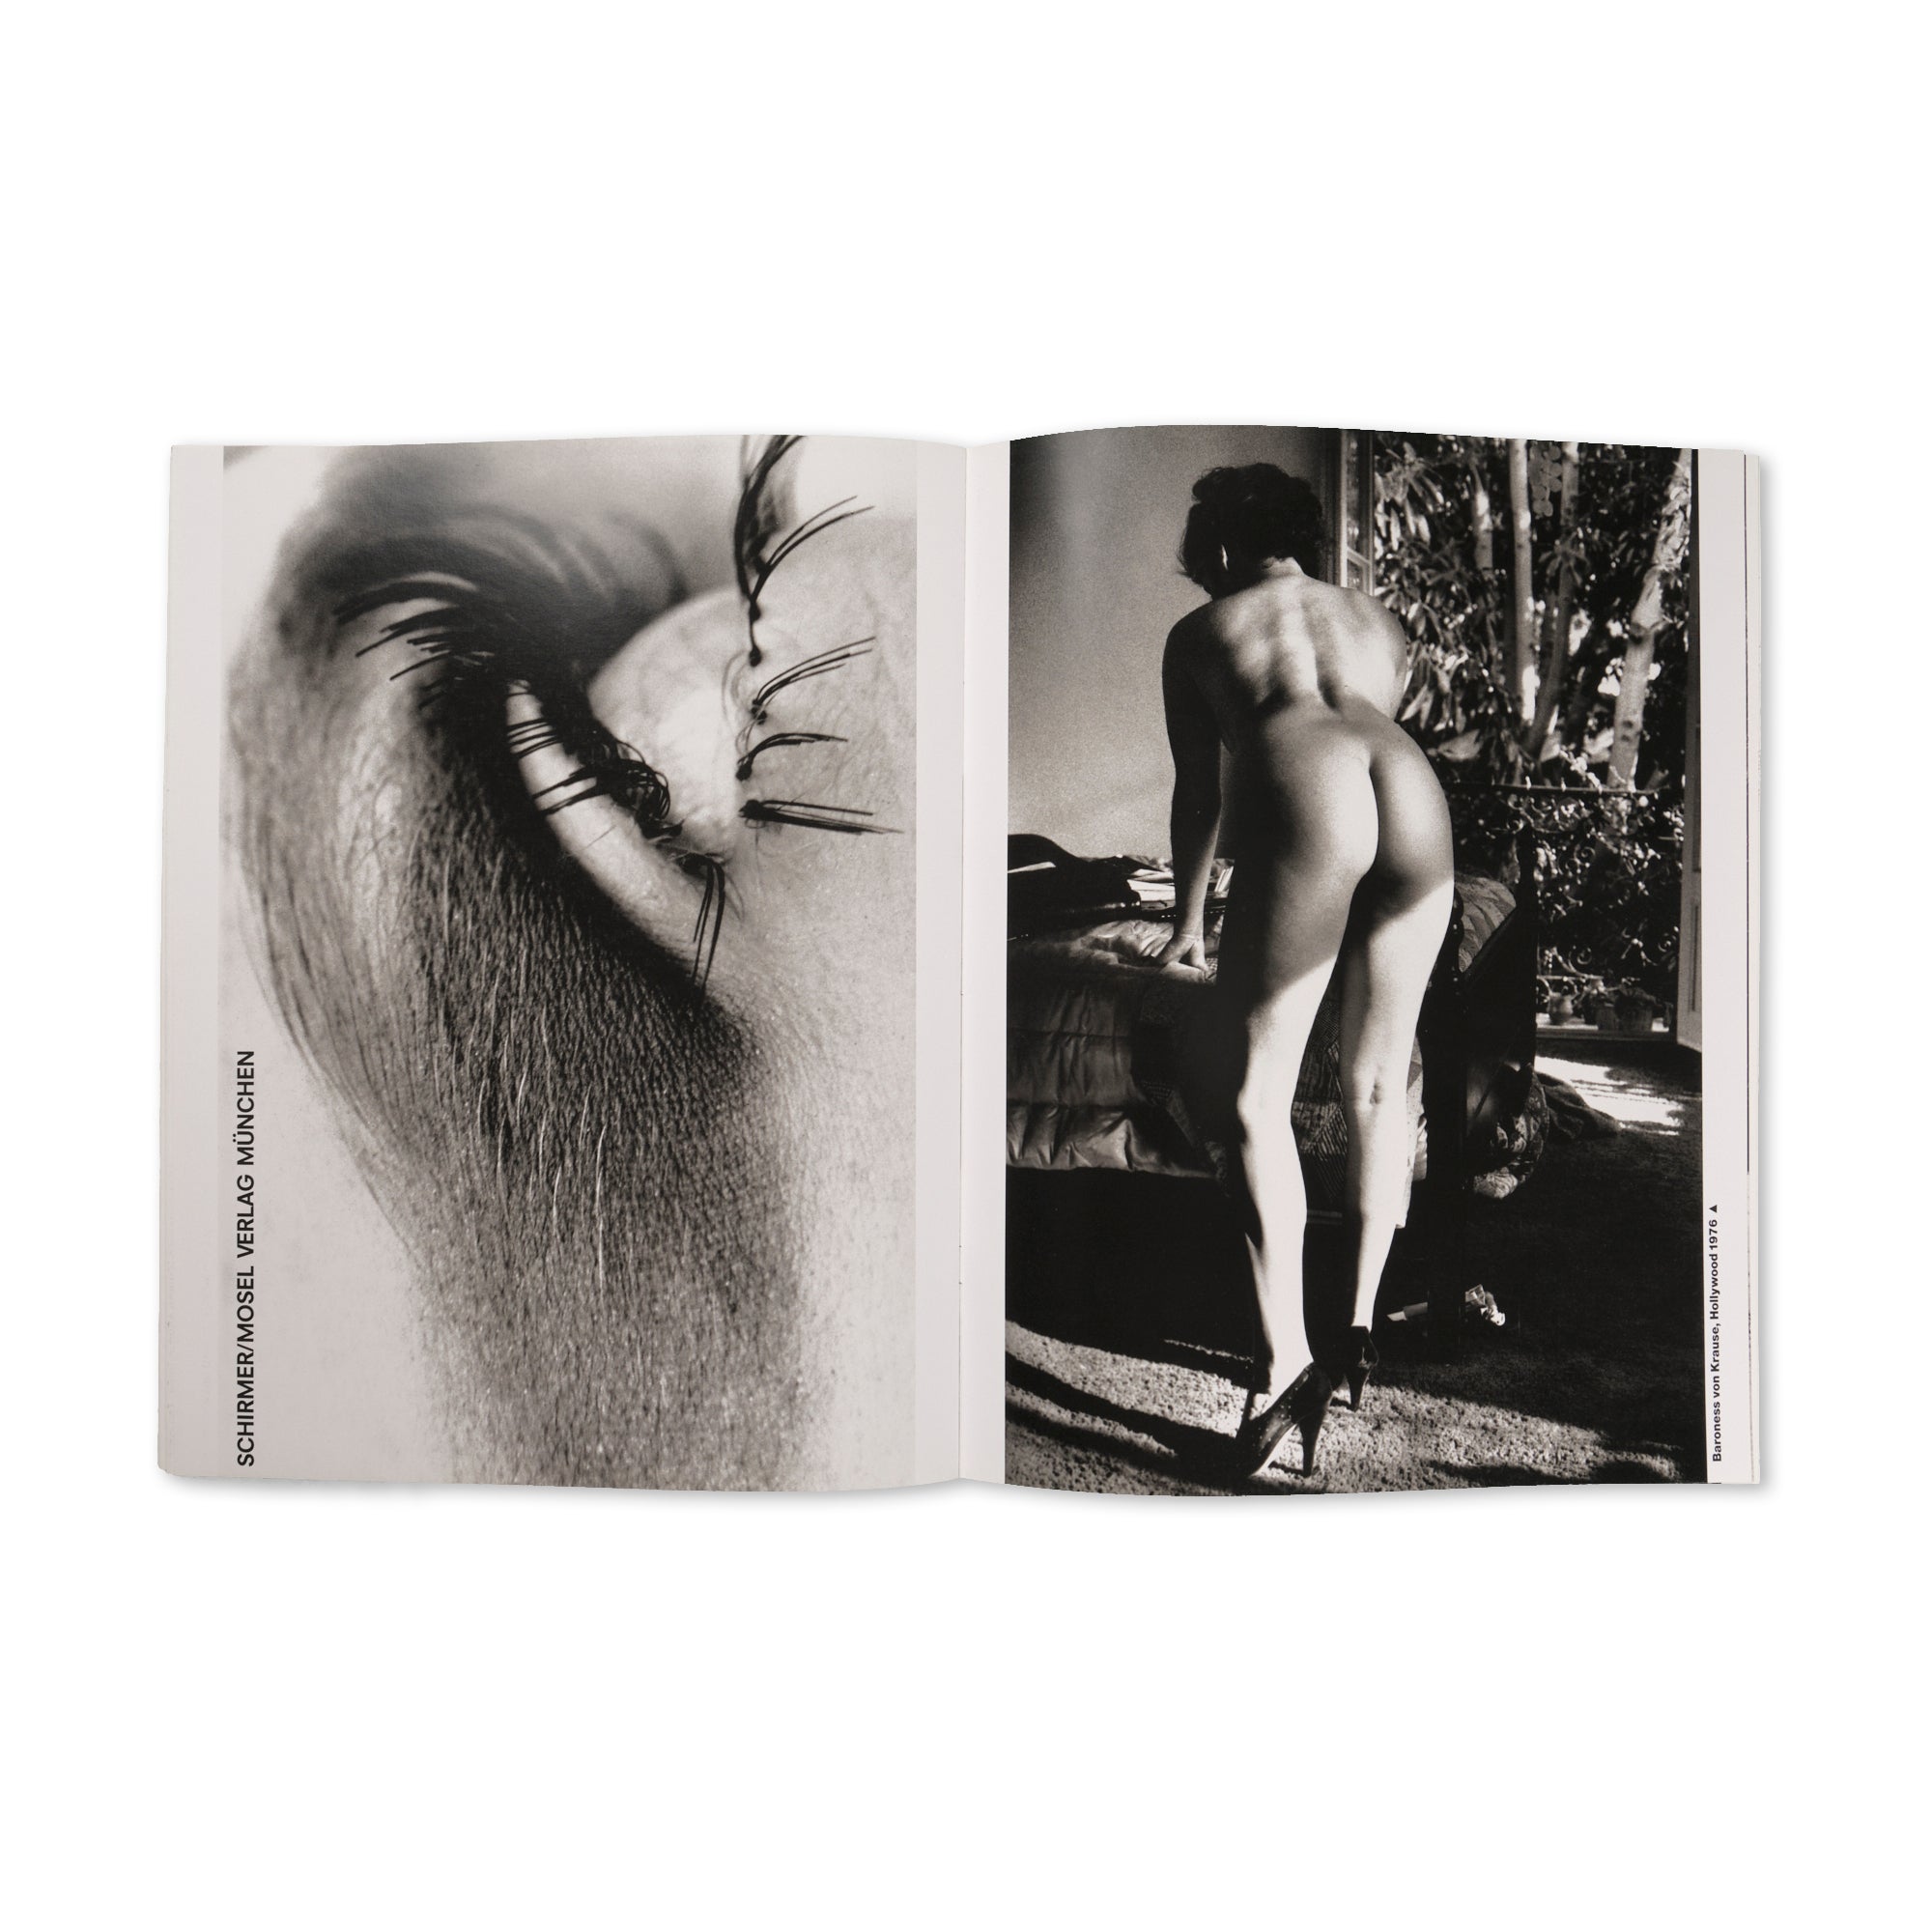 Helmut Newton's Illustrated No. 2 Pictures from an Exhibition